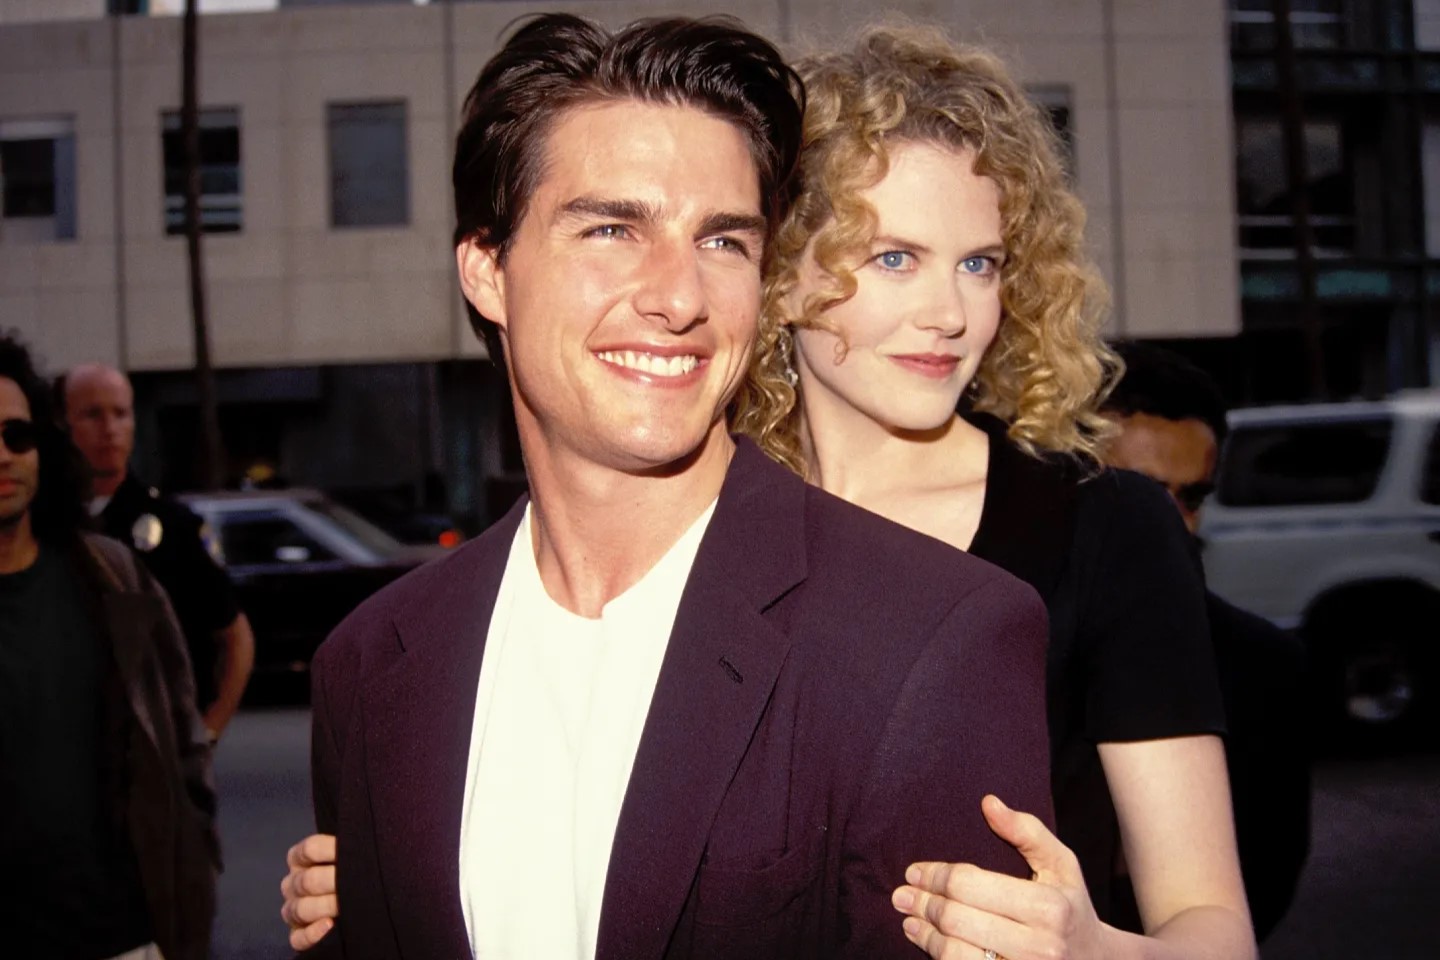 Tom Cruise And Nicole Kidman's Children, Isabella And Connor, Over The Years